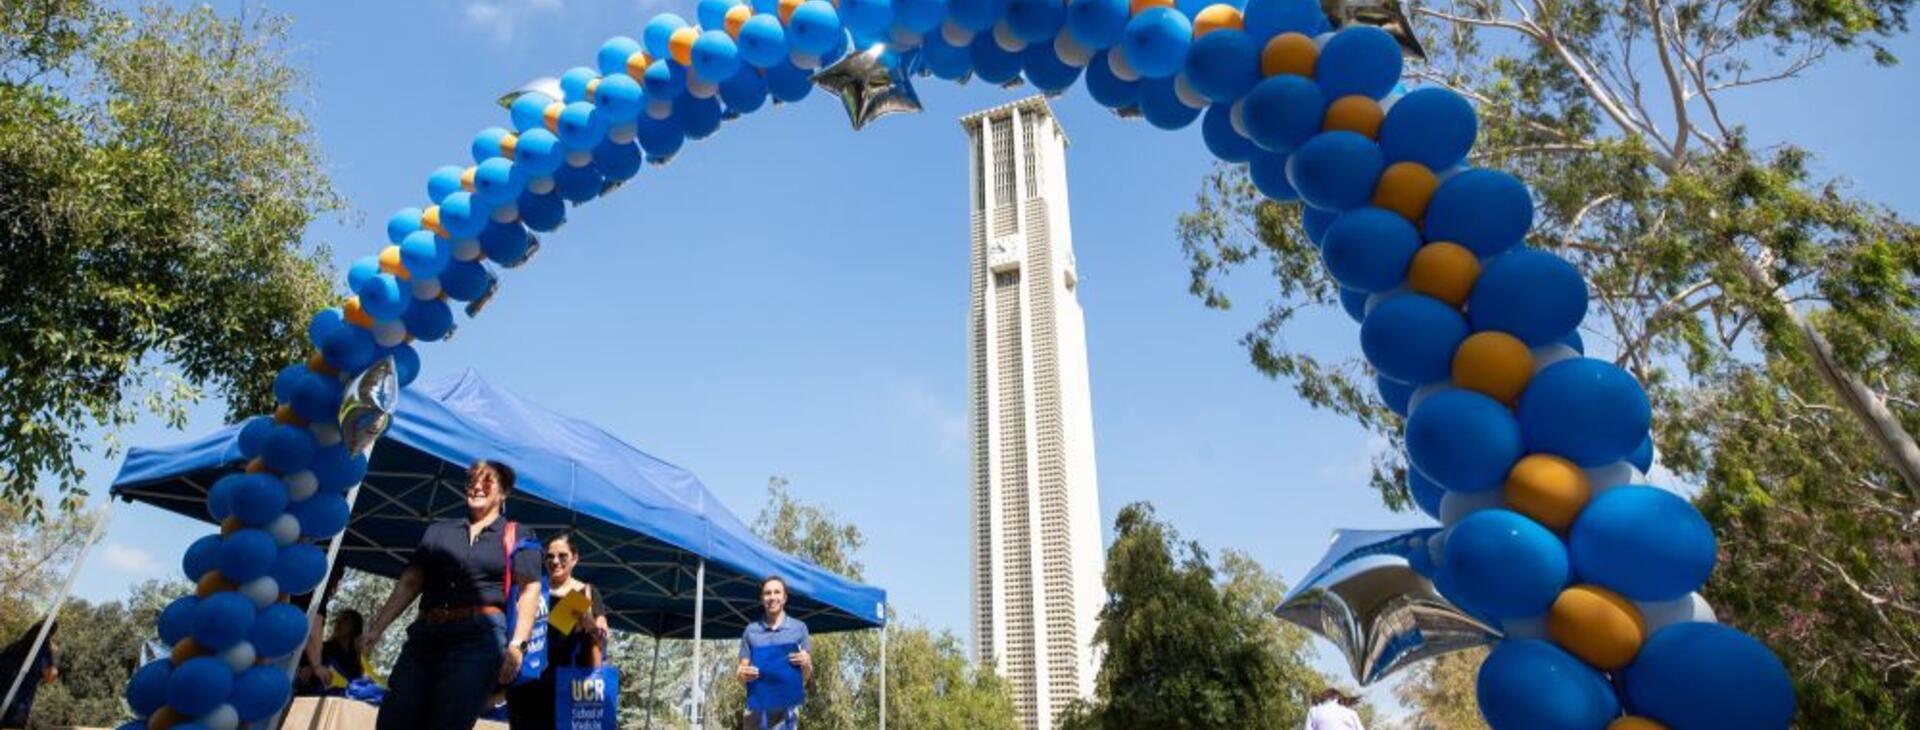 UCR Bell Tower behind a blue and gold balloon arch